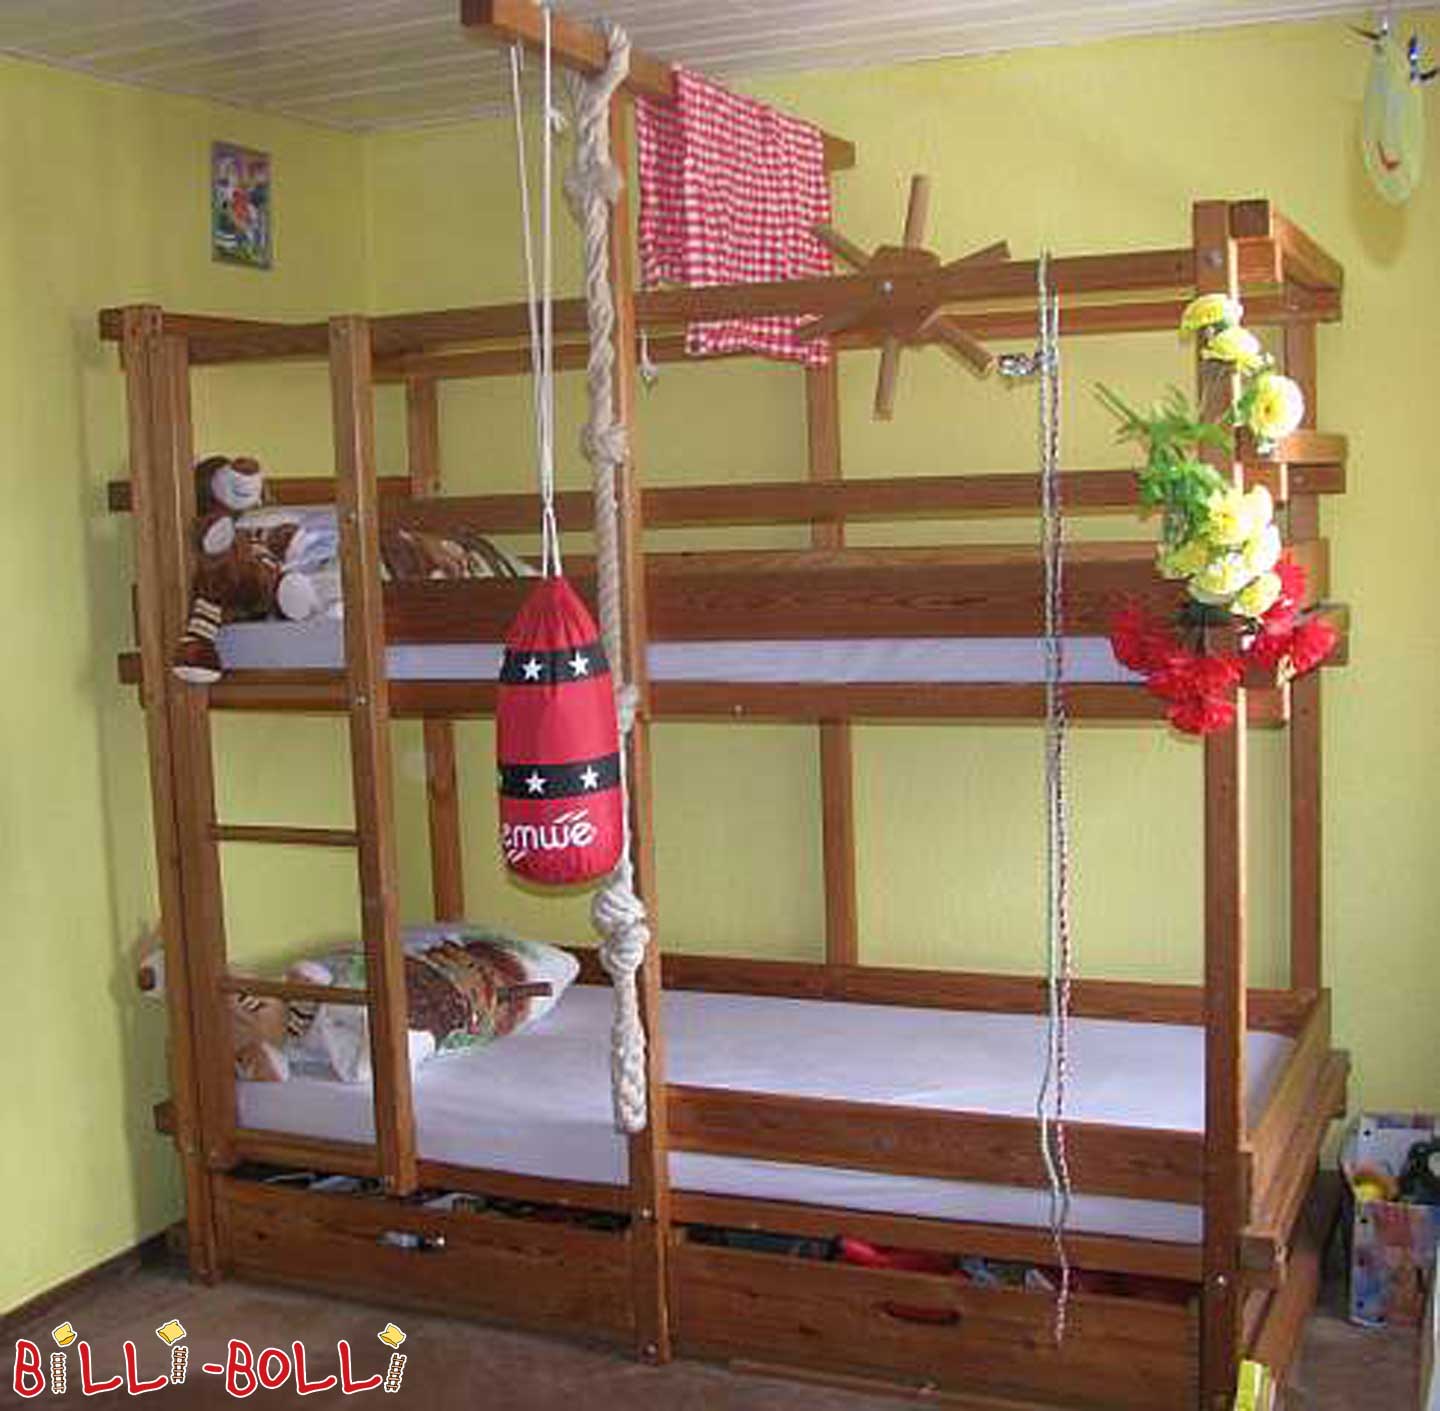 Gullibo Pirate Bunk Bed (Category: second hand bunk bed)